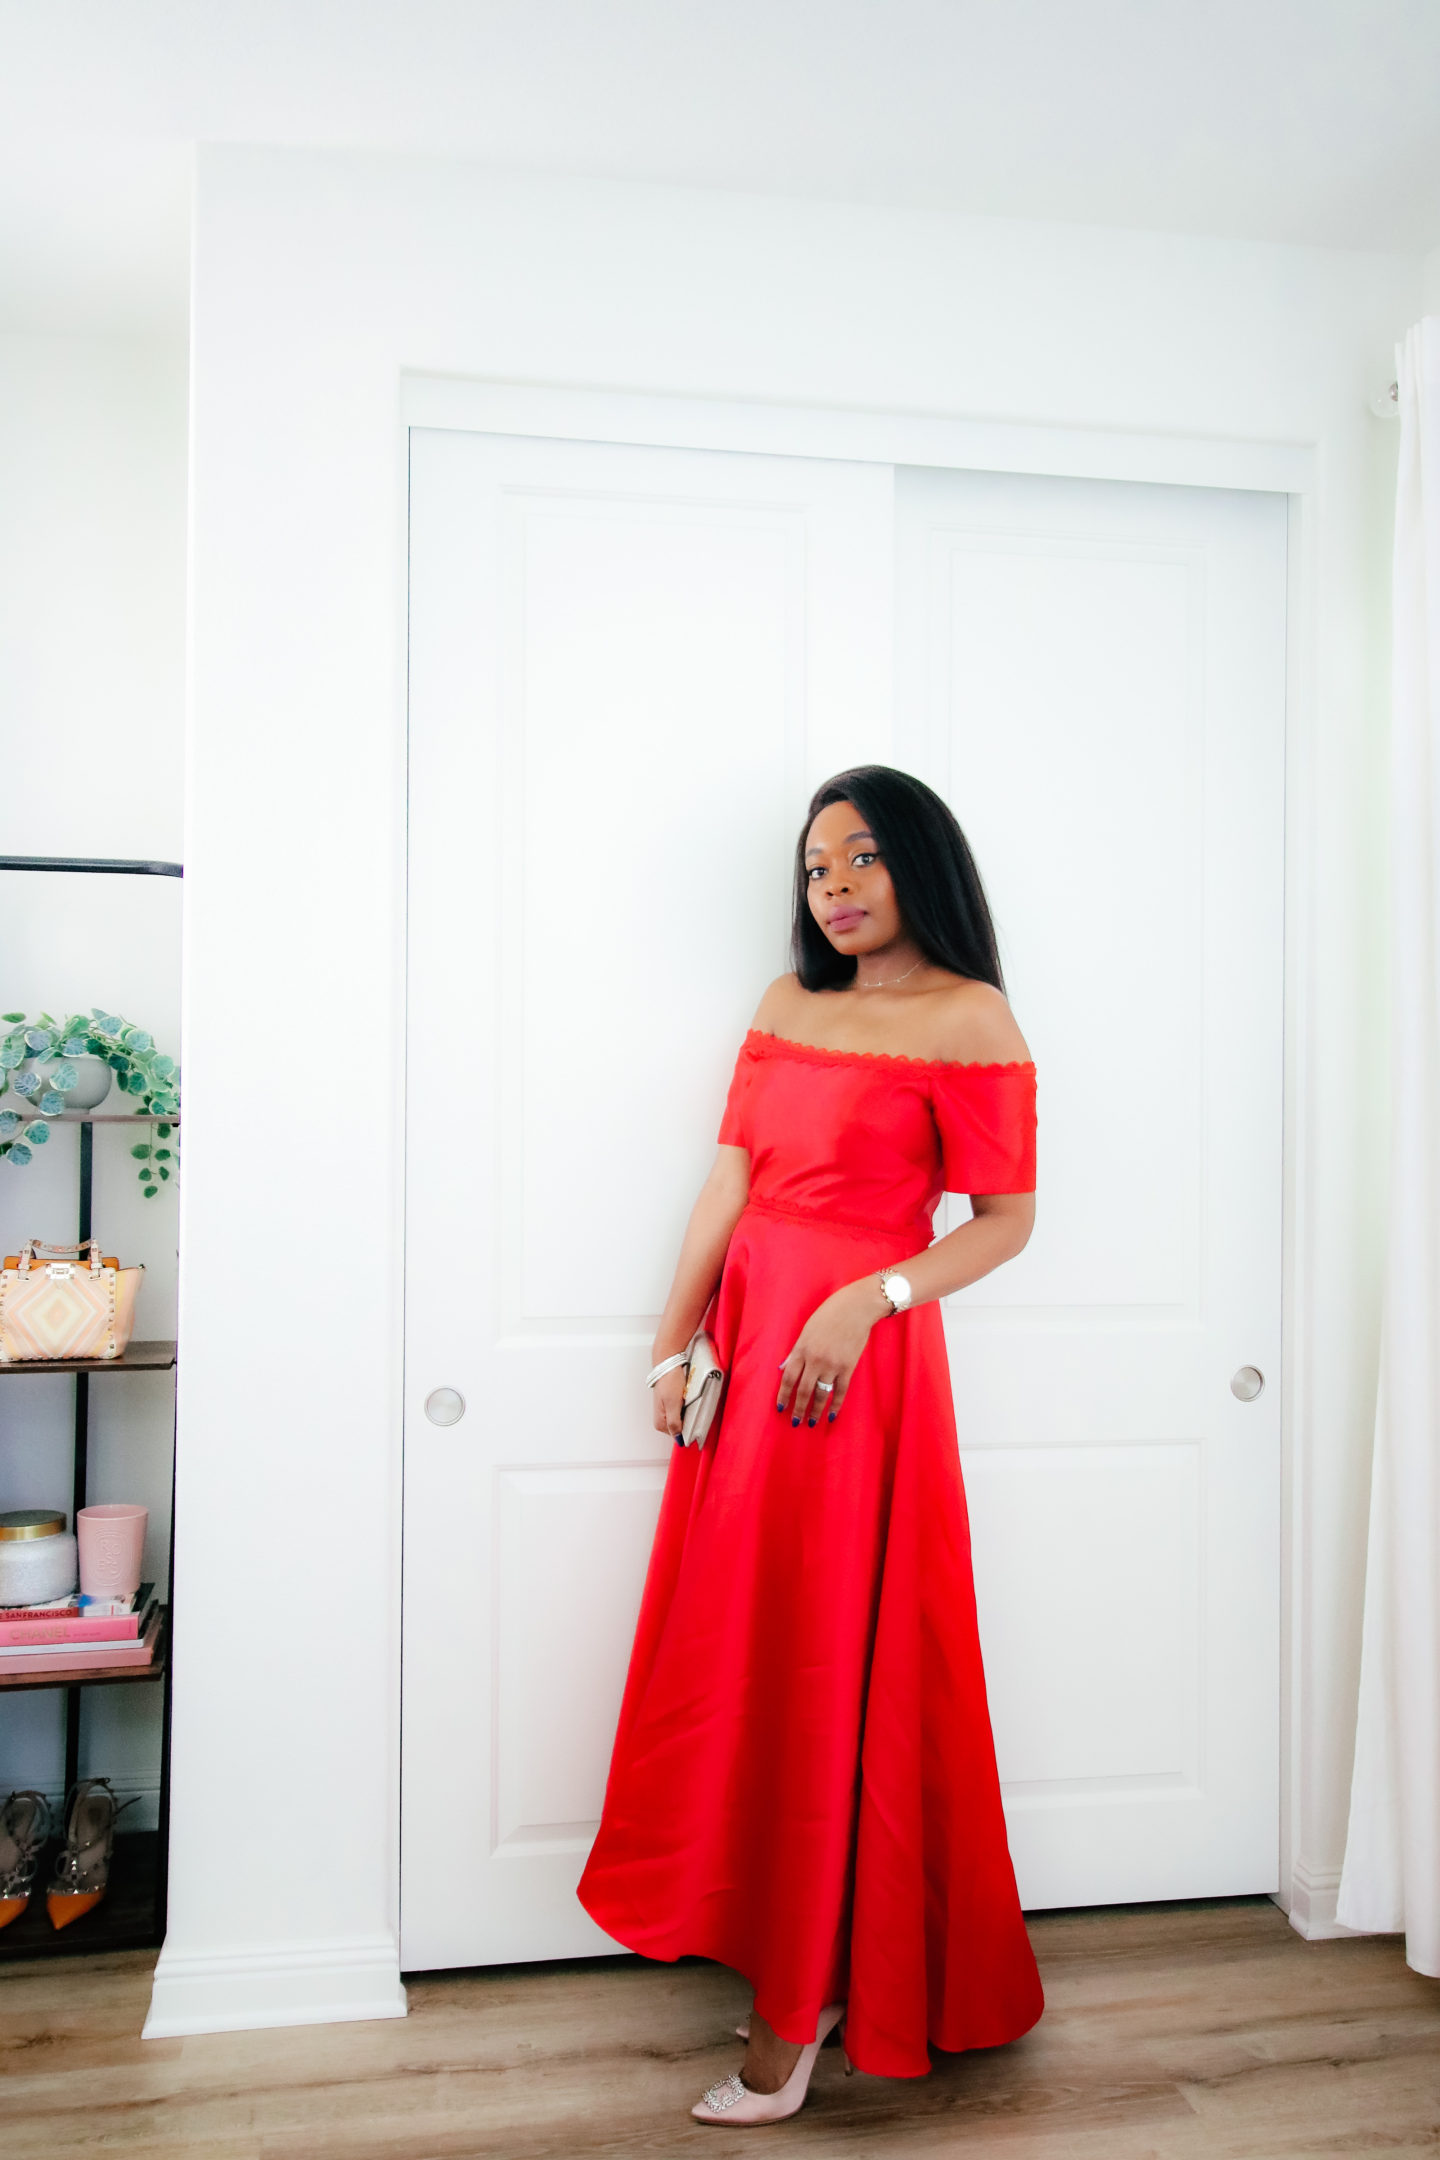 Stunning Red Wedding Dresses at The Gilded Gown | The Gilded Gown